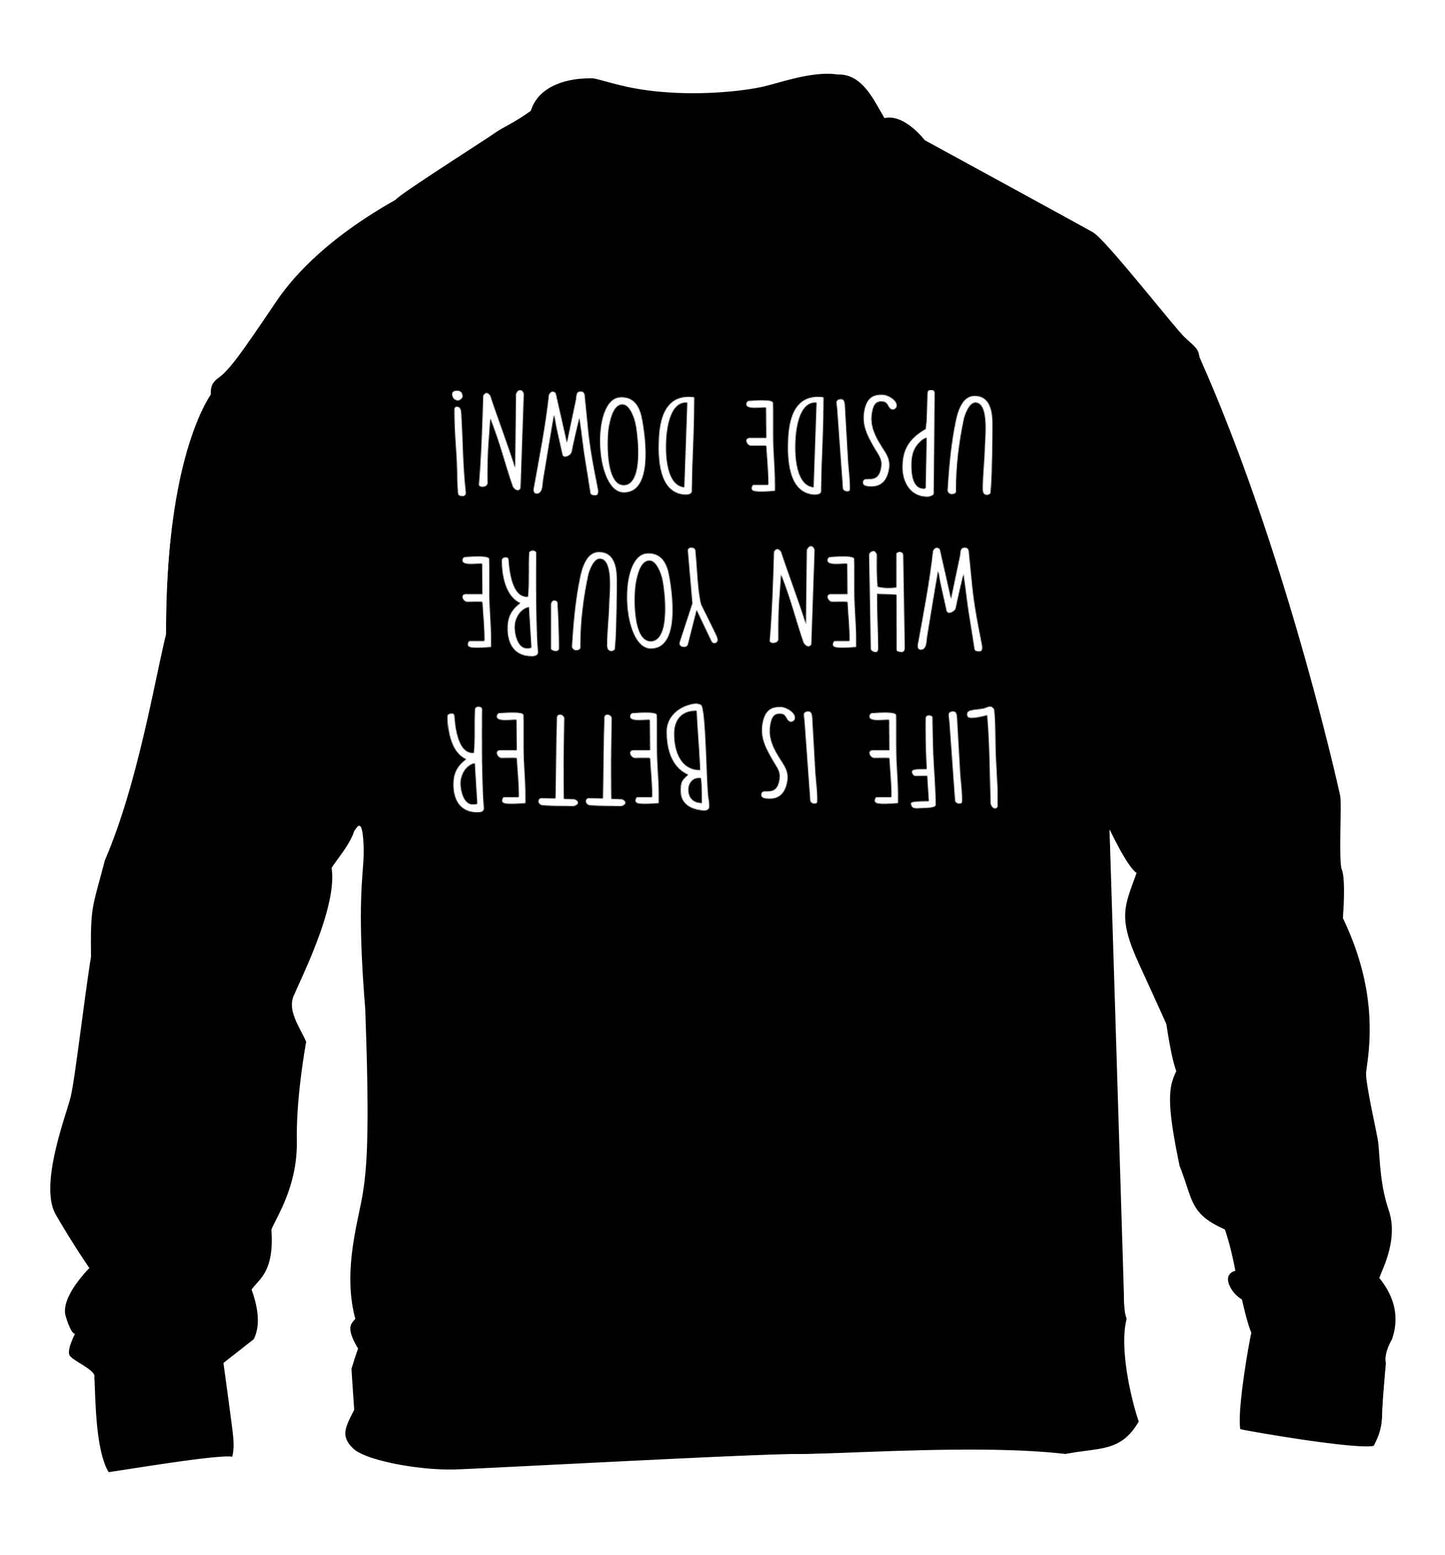 Life is better upside down children's black sweater 12-13 Years